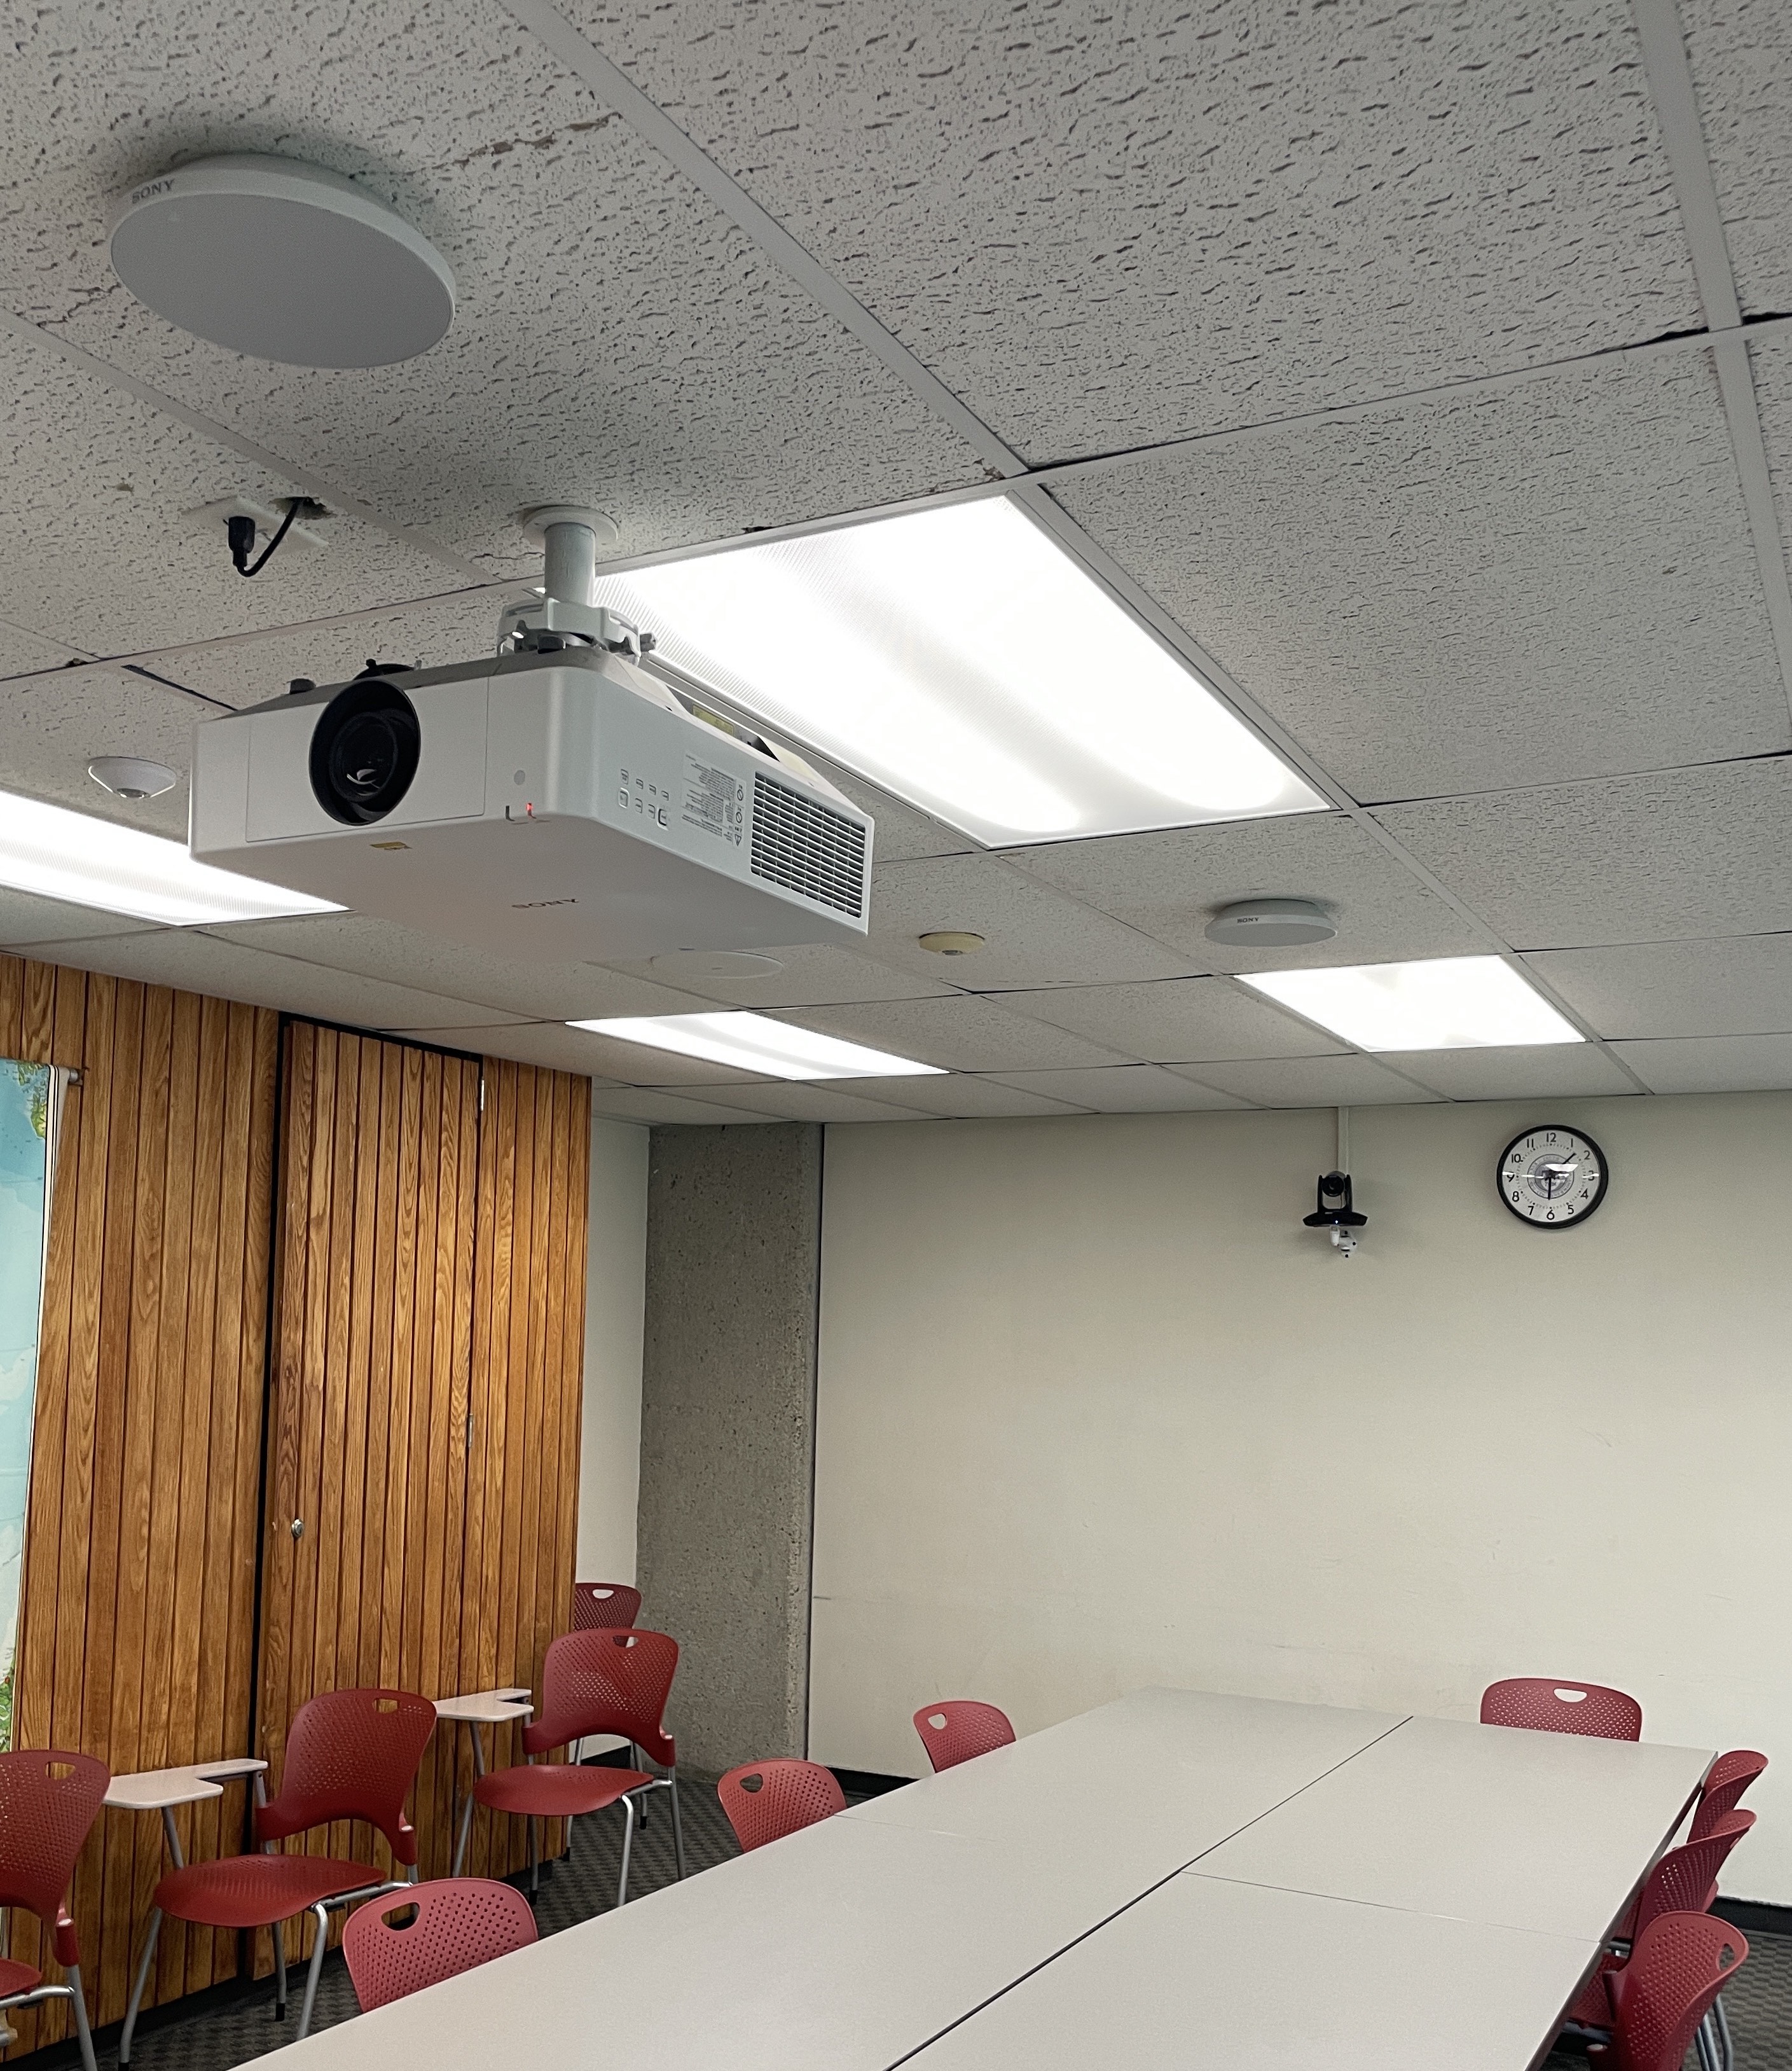 HyFlex classroom showing ceiling microphones and wall mounted cameras